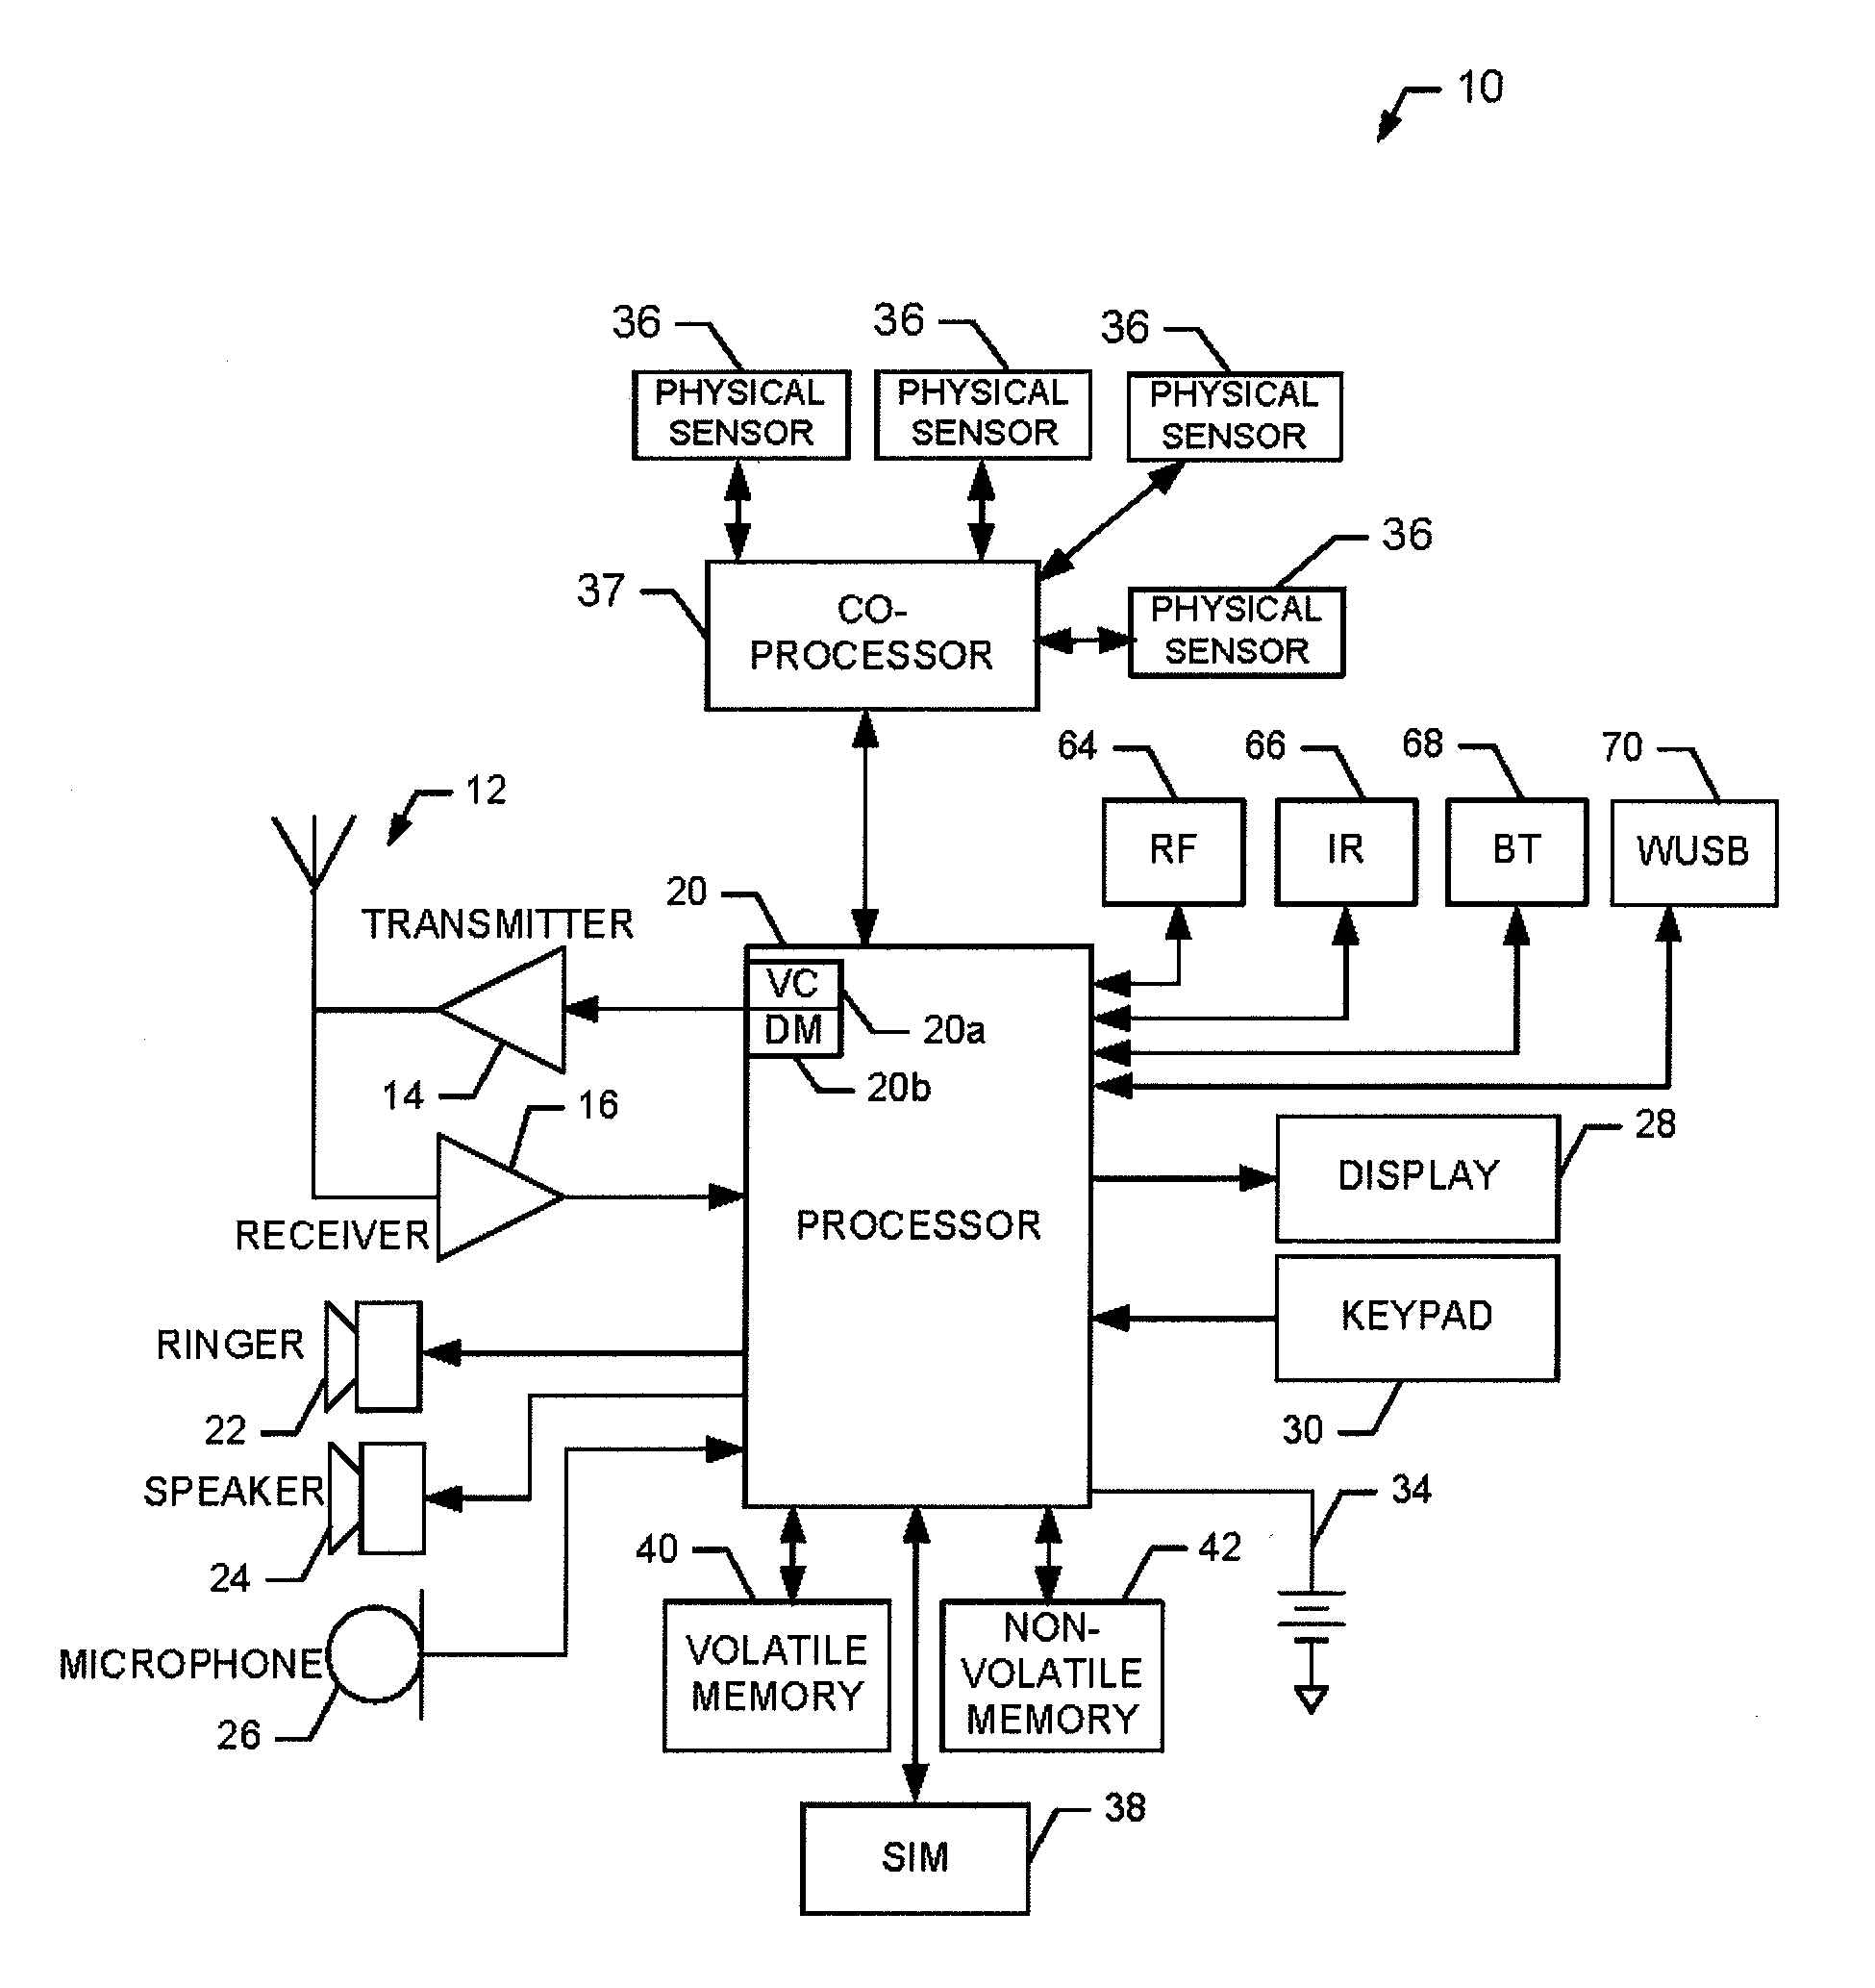 Method and apparatus for providing context-based power consumption control